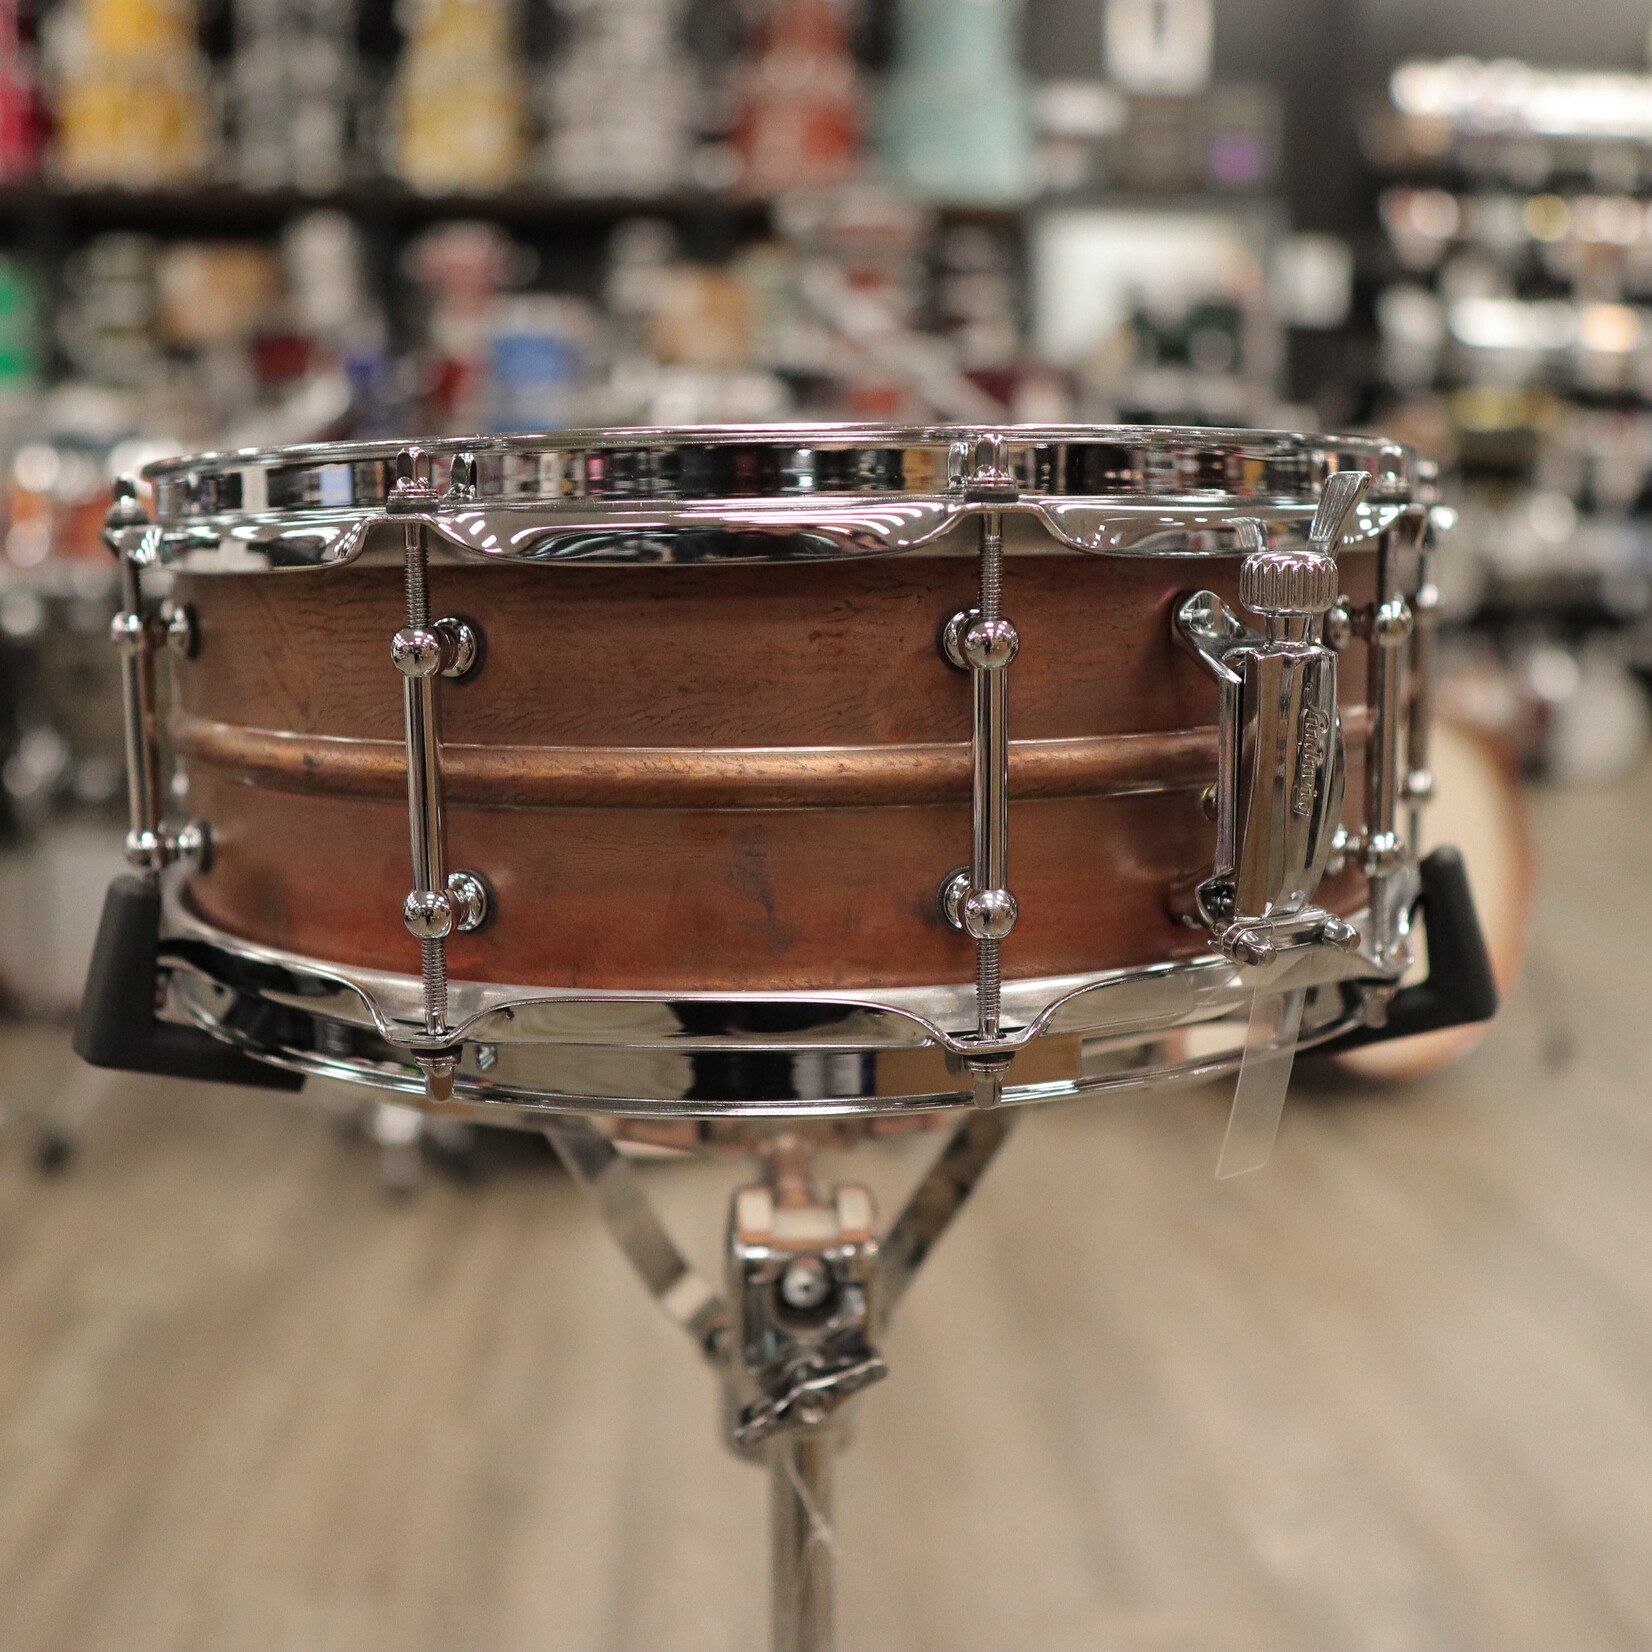 Ludwig Ludwig 5x14" Raw Copperphonic Snare Drum with Tube Lugs LC661T